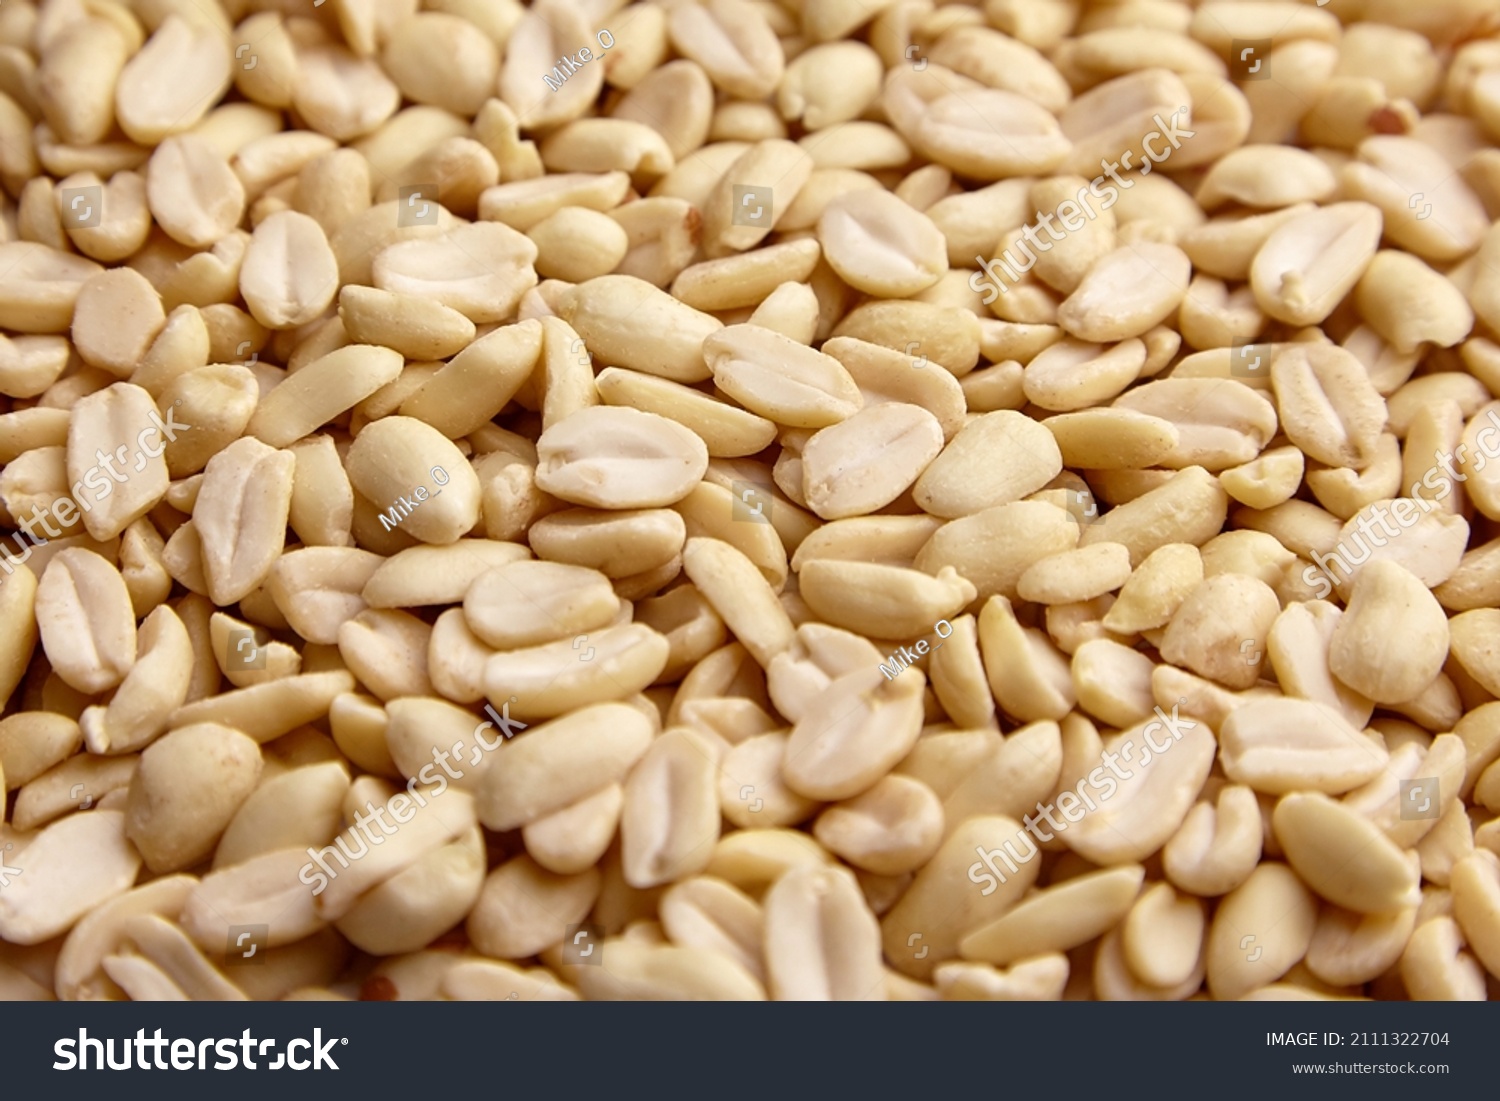 Raw blanched peanuts as food background closeup #2111322704